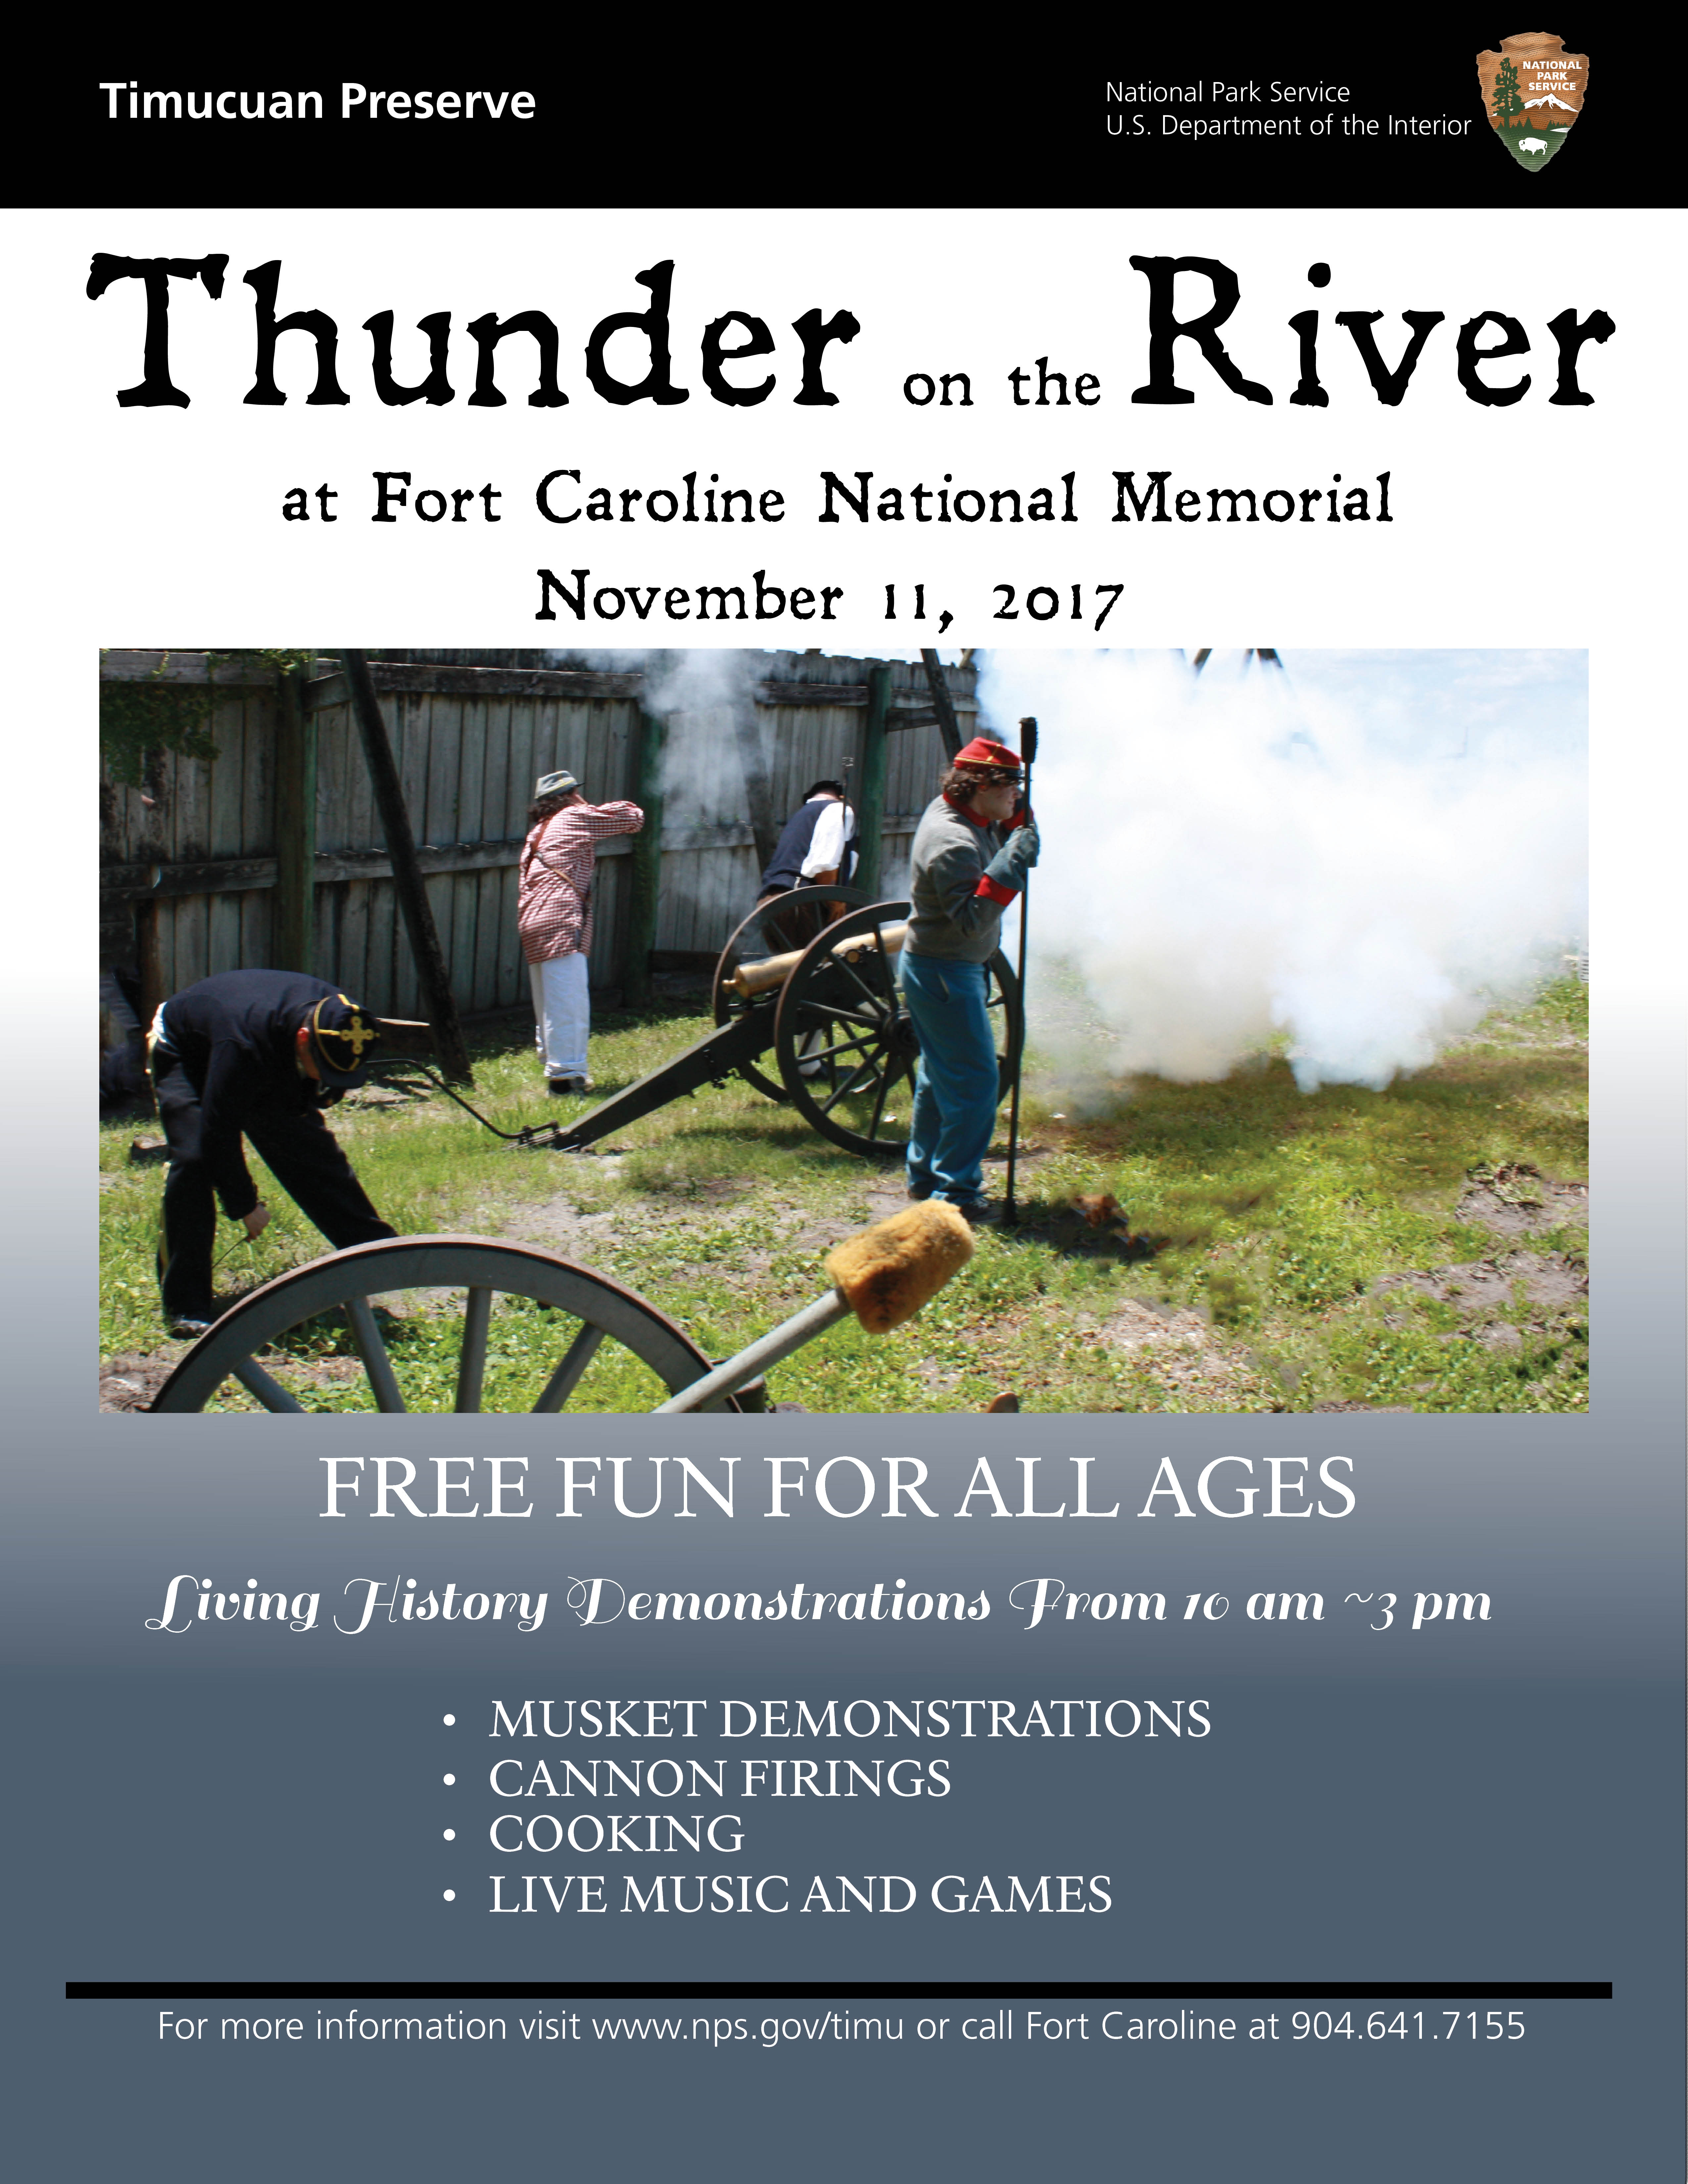 a flyer with photo of a cannon being fired advertising an event